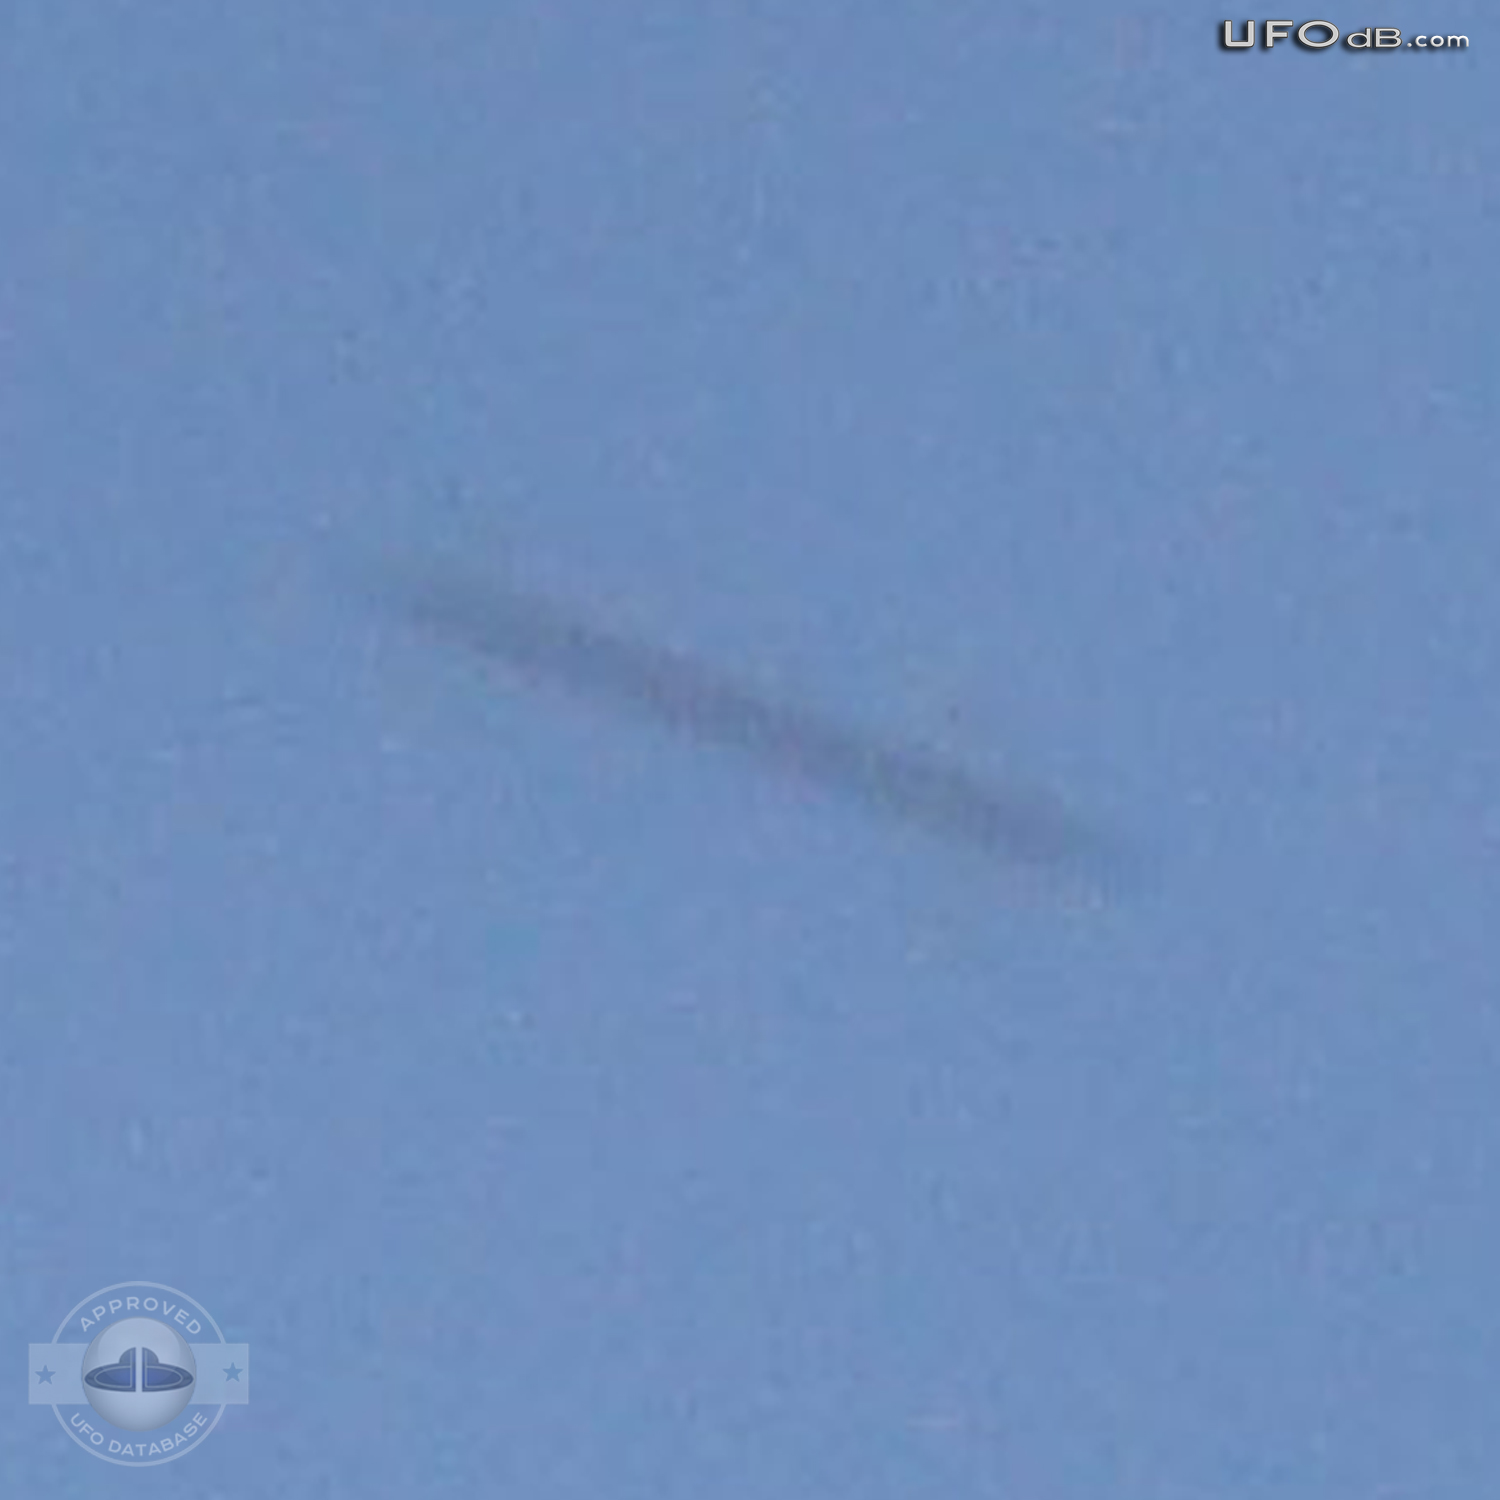 Guarulhos Airport, Brazil | UFO near airplane taking off | April 2011 UFO Picture #337-4